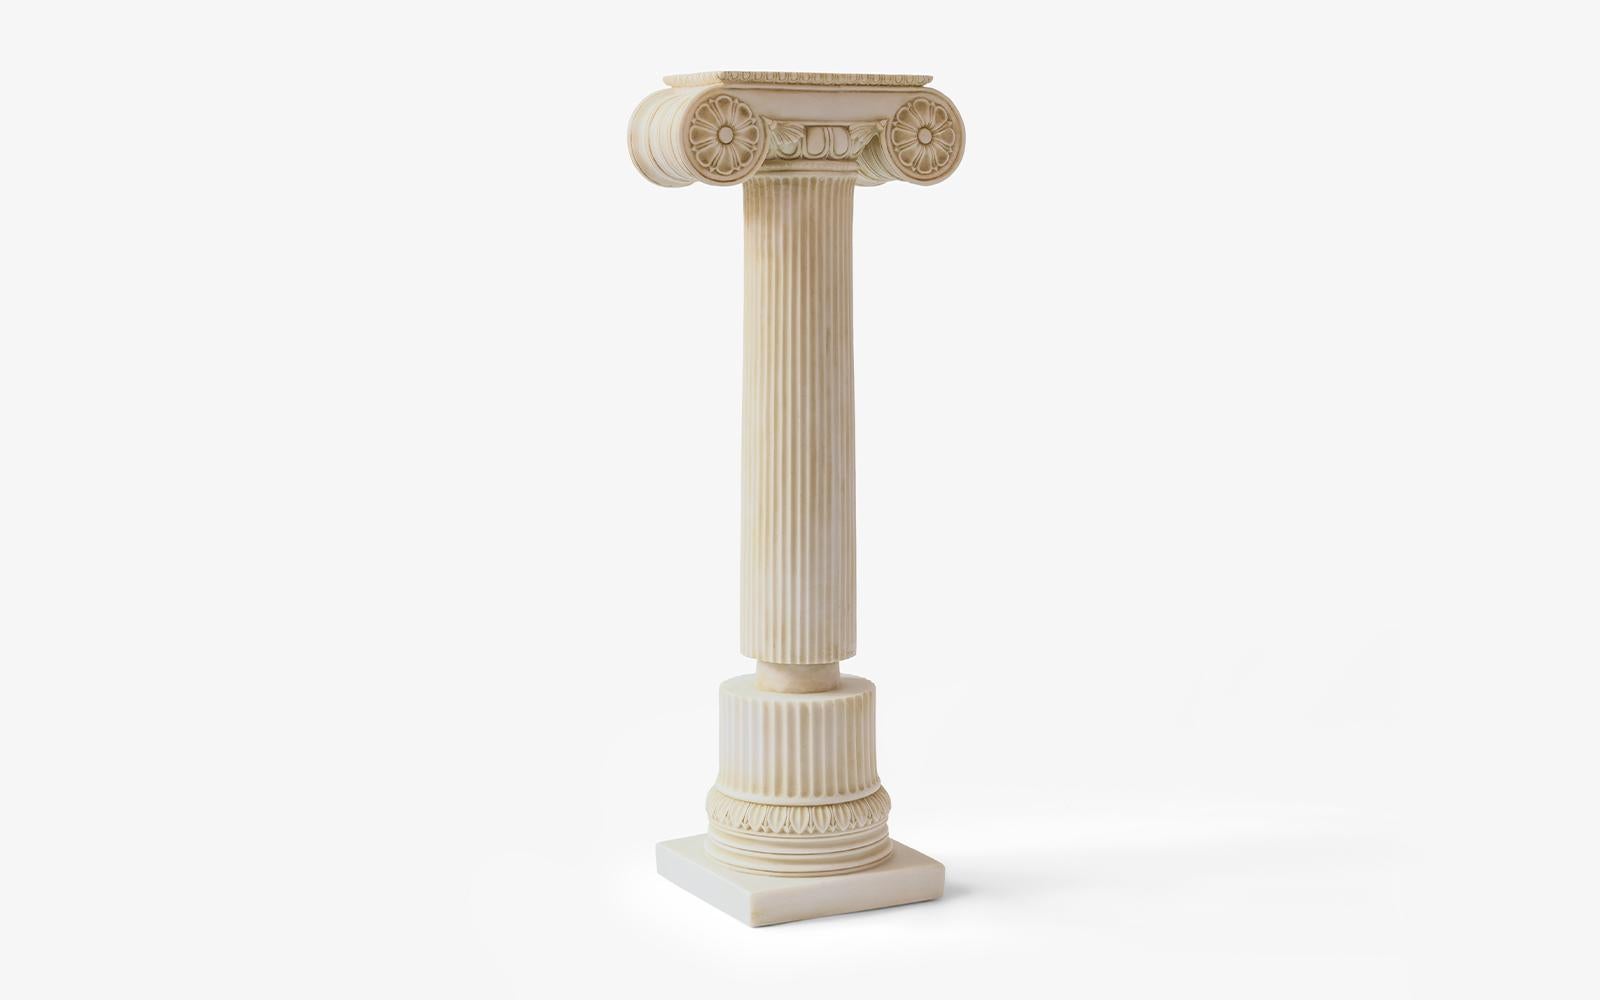 Weight: 7,5 kg
Ionic regular columns, born on the western and southern coasts of Anatolia, have a thin, long and elegant form.

Lagu's special selection brings the most important sculptures of world history to your living spaces with the best